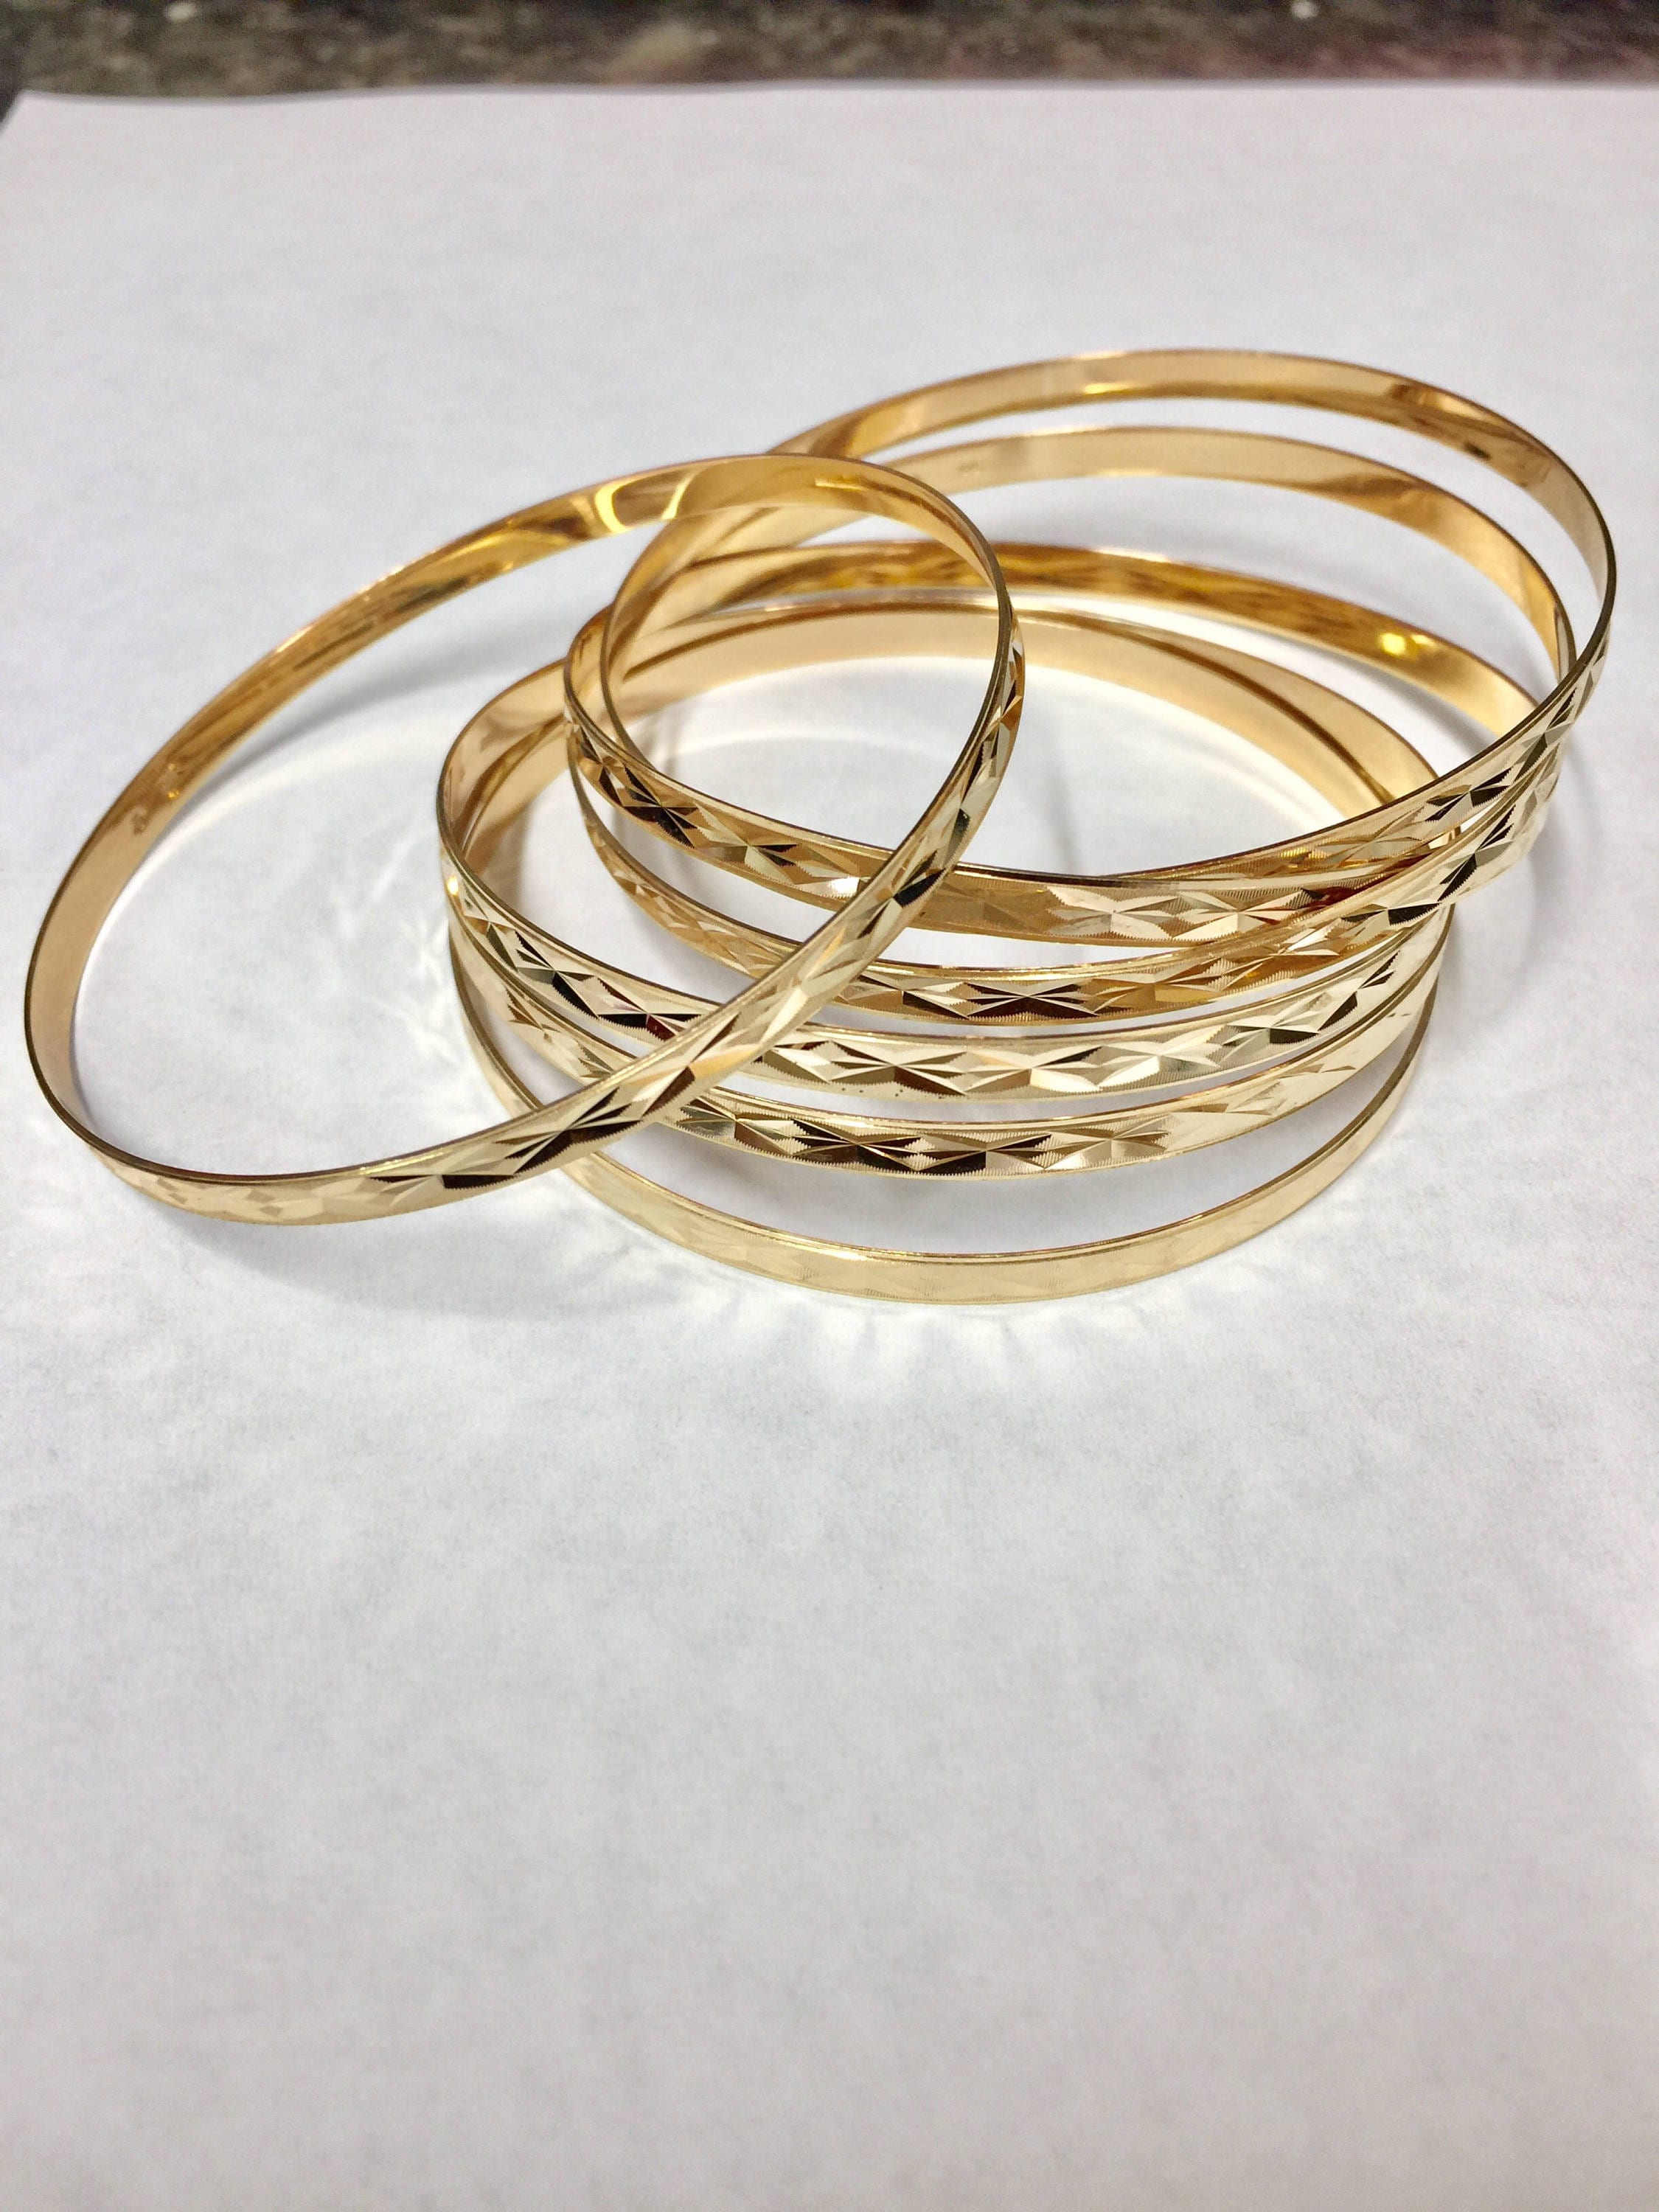 Gold Bangles for sale in Tucson, Arizona | Facebook Marketplace